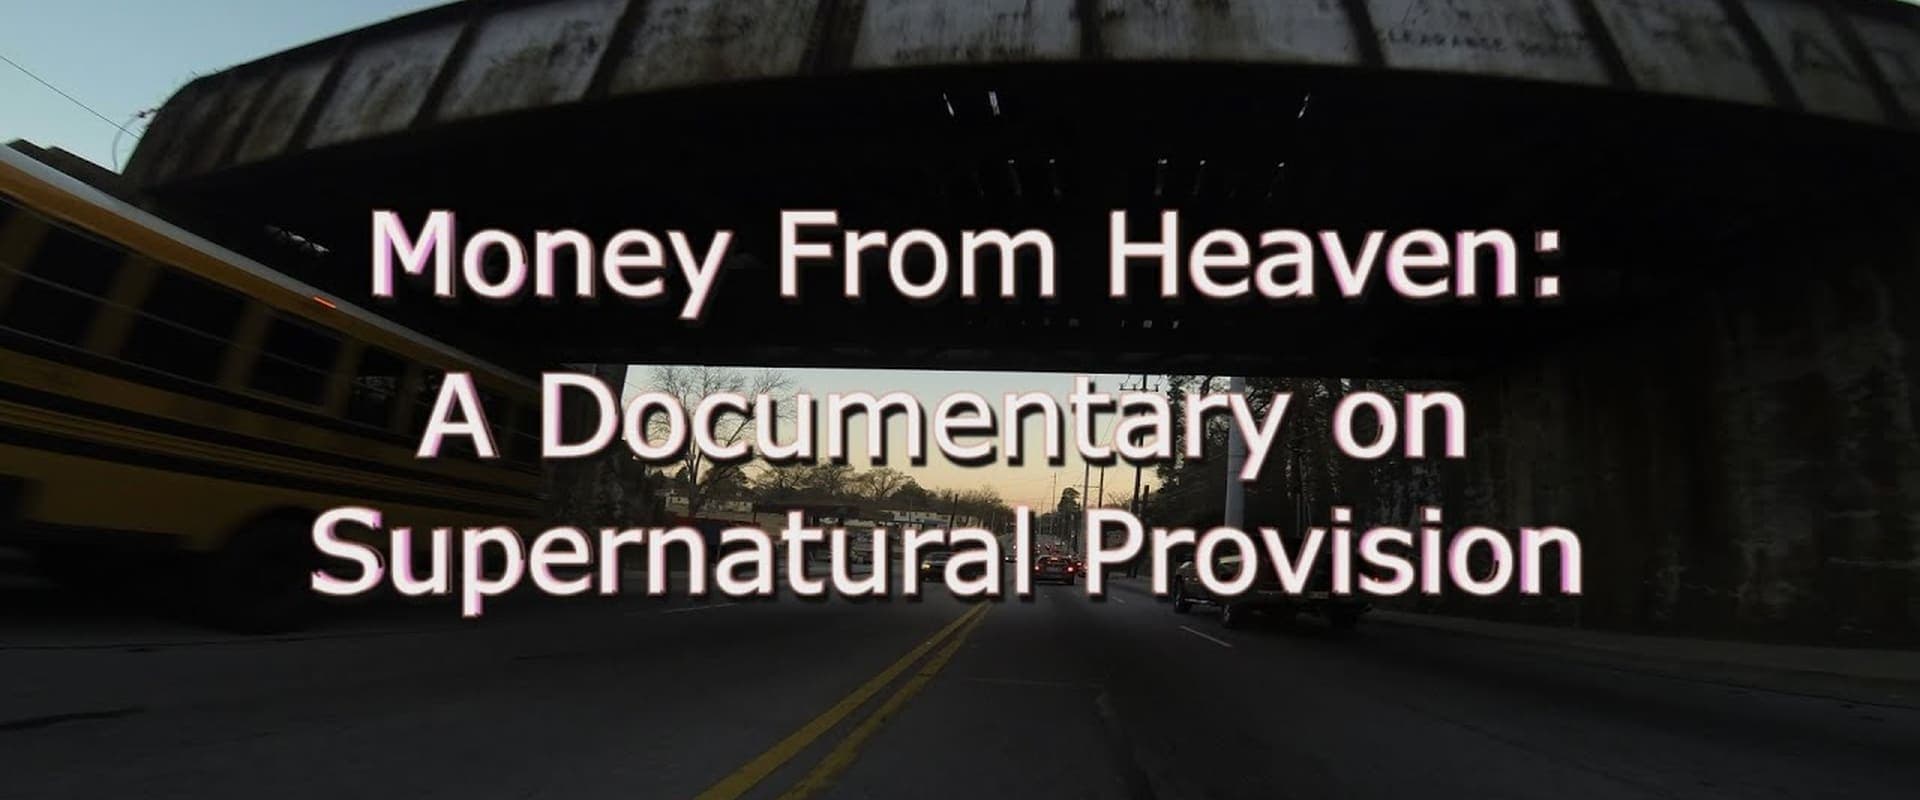 Money from Heaven: A Documentary on Supernatural Provision